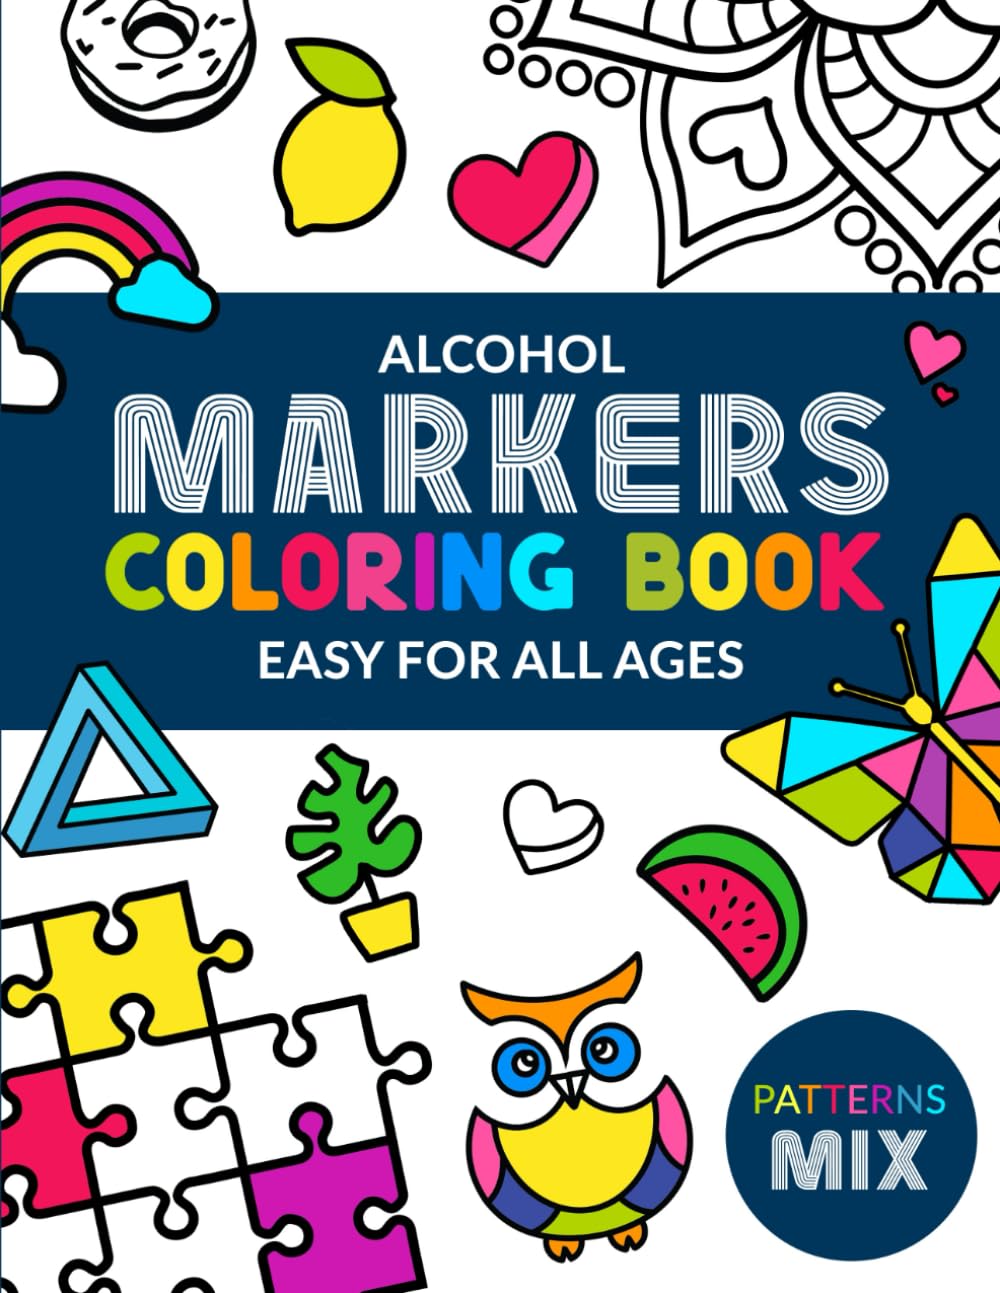 Alcohol Marker Coloring Book: 50 Simple Bold and Easy Satisfying Patterns Mindful Mix. Minimalist Small Cute Things. for Relaxation Anxiety and Stress